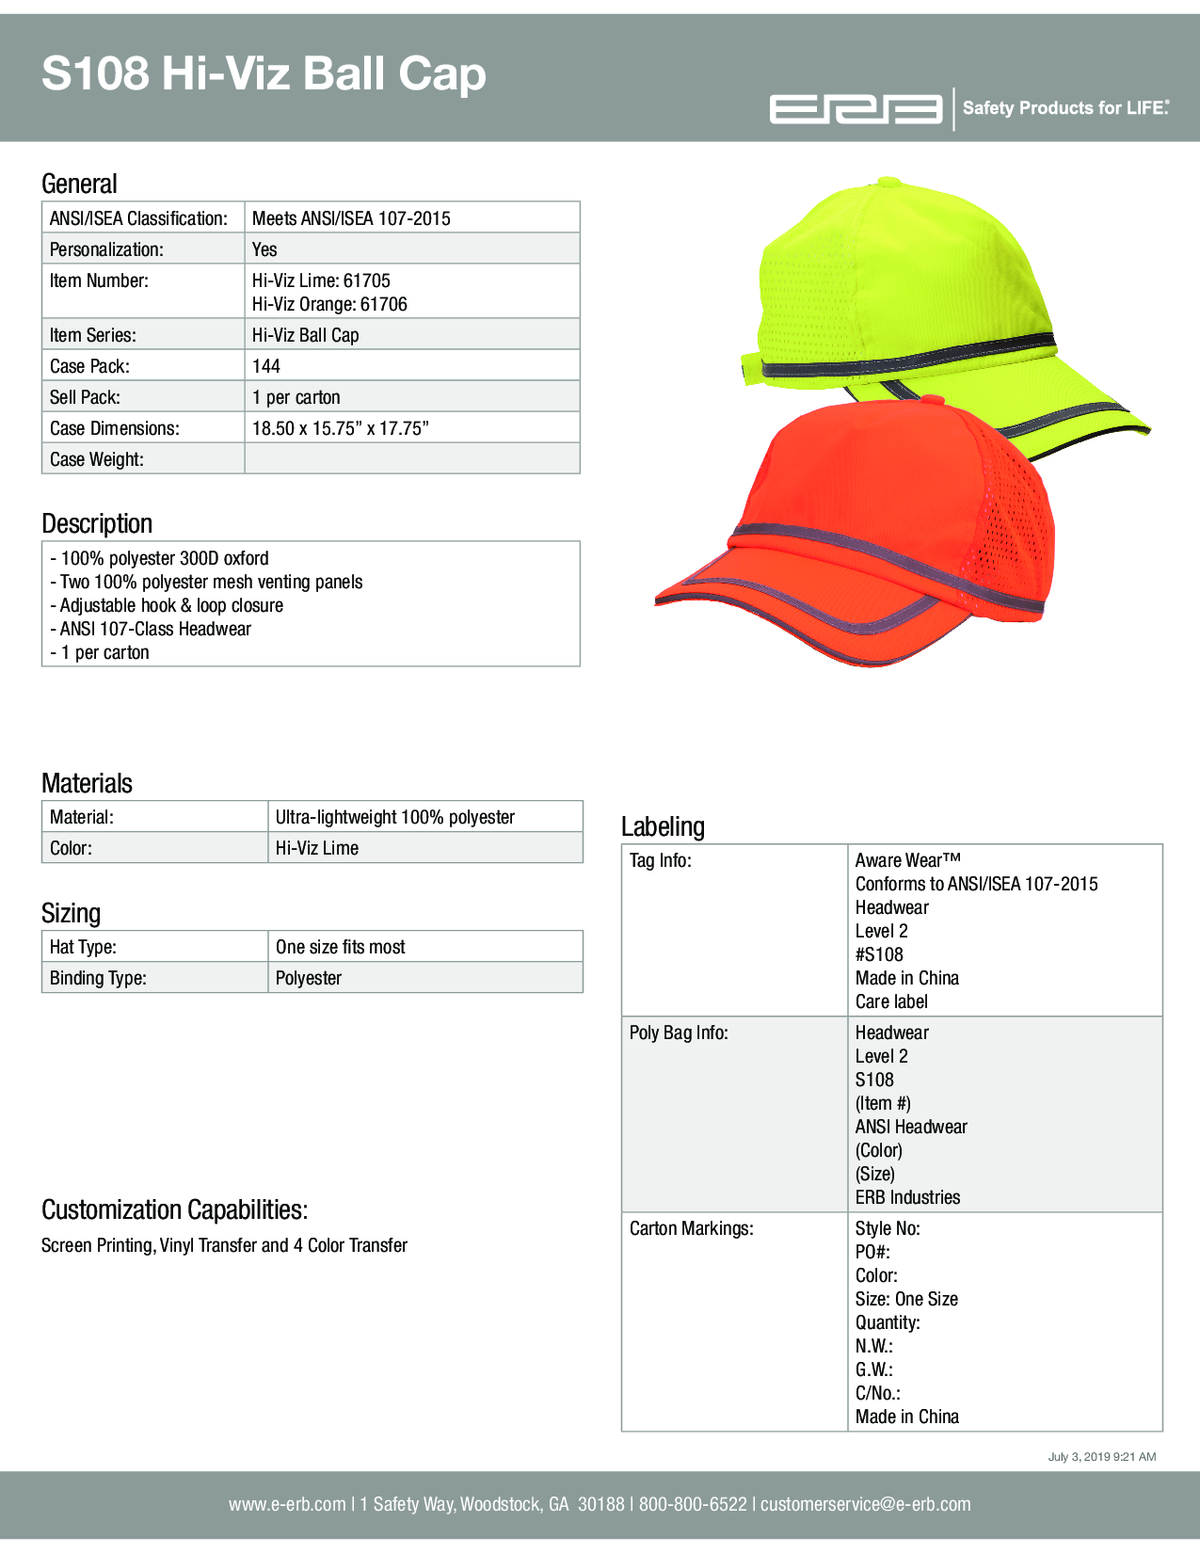 S108 Ball Cap ANSI Rated 1pc